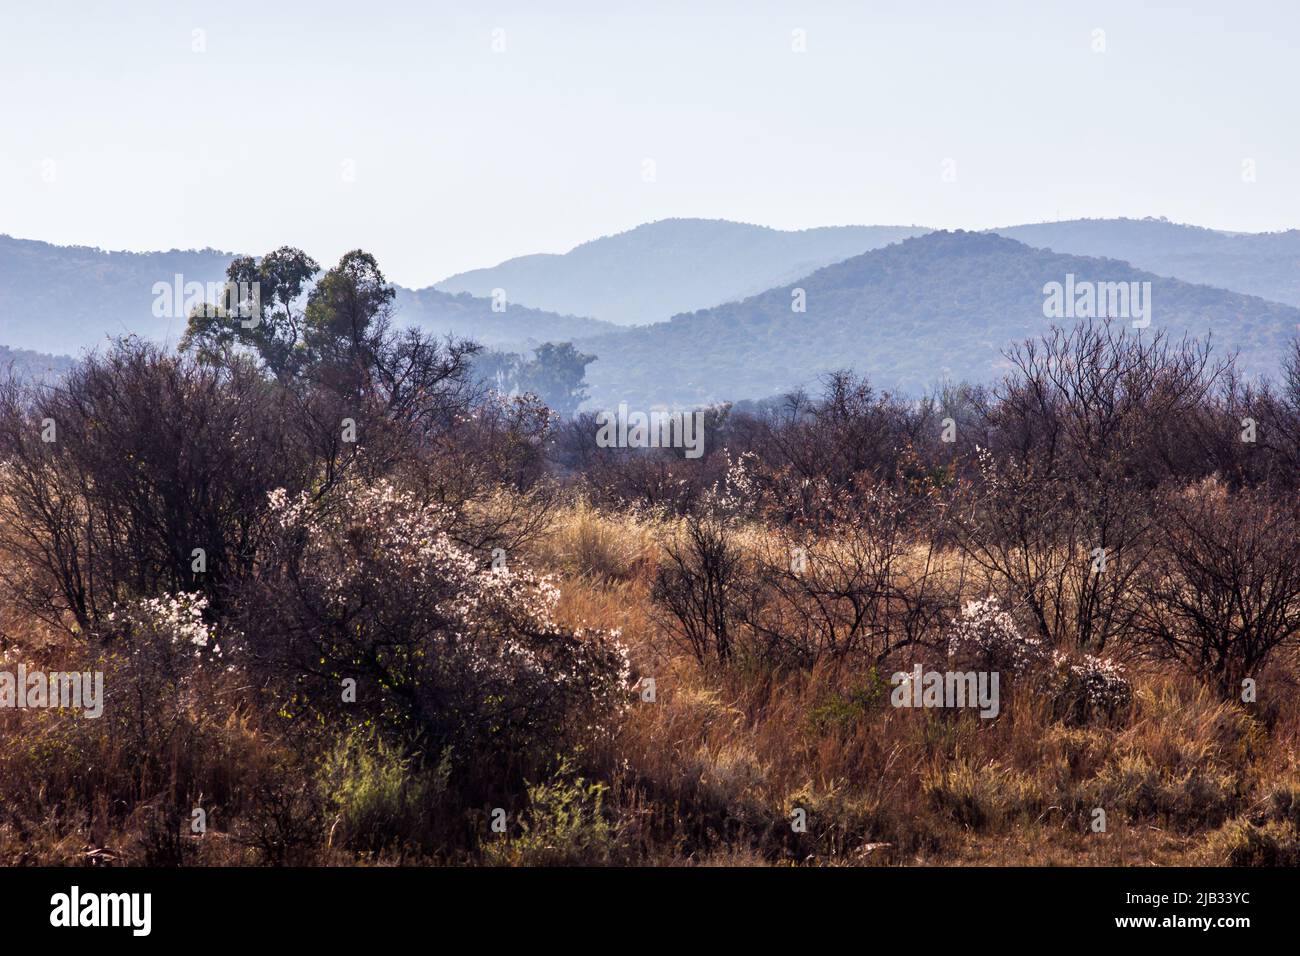 Early morning South African Bushveld landscape with bushes covered in wild clematis in the foreground Stock Photo